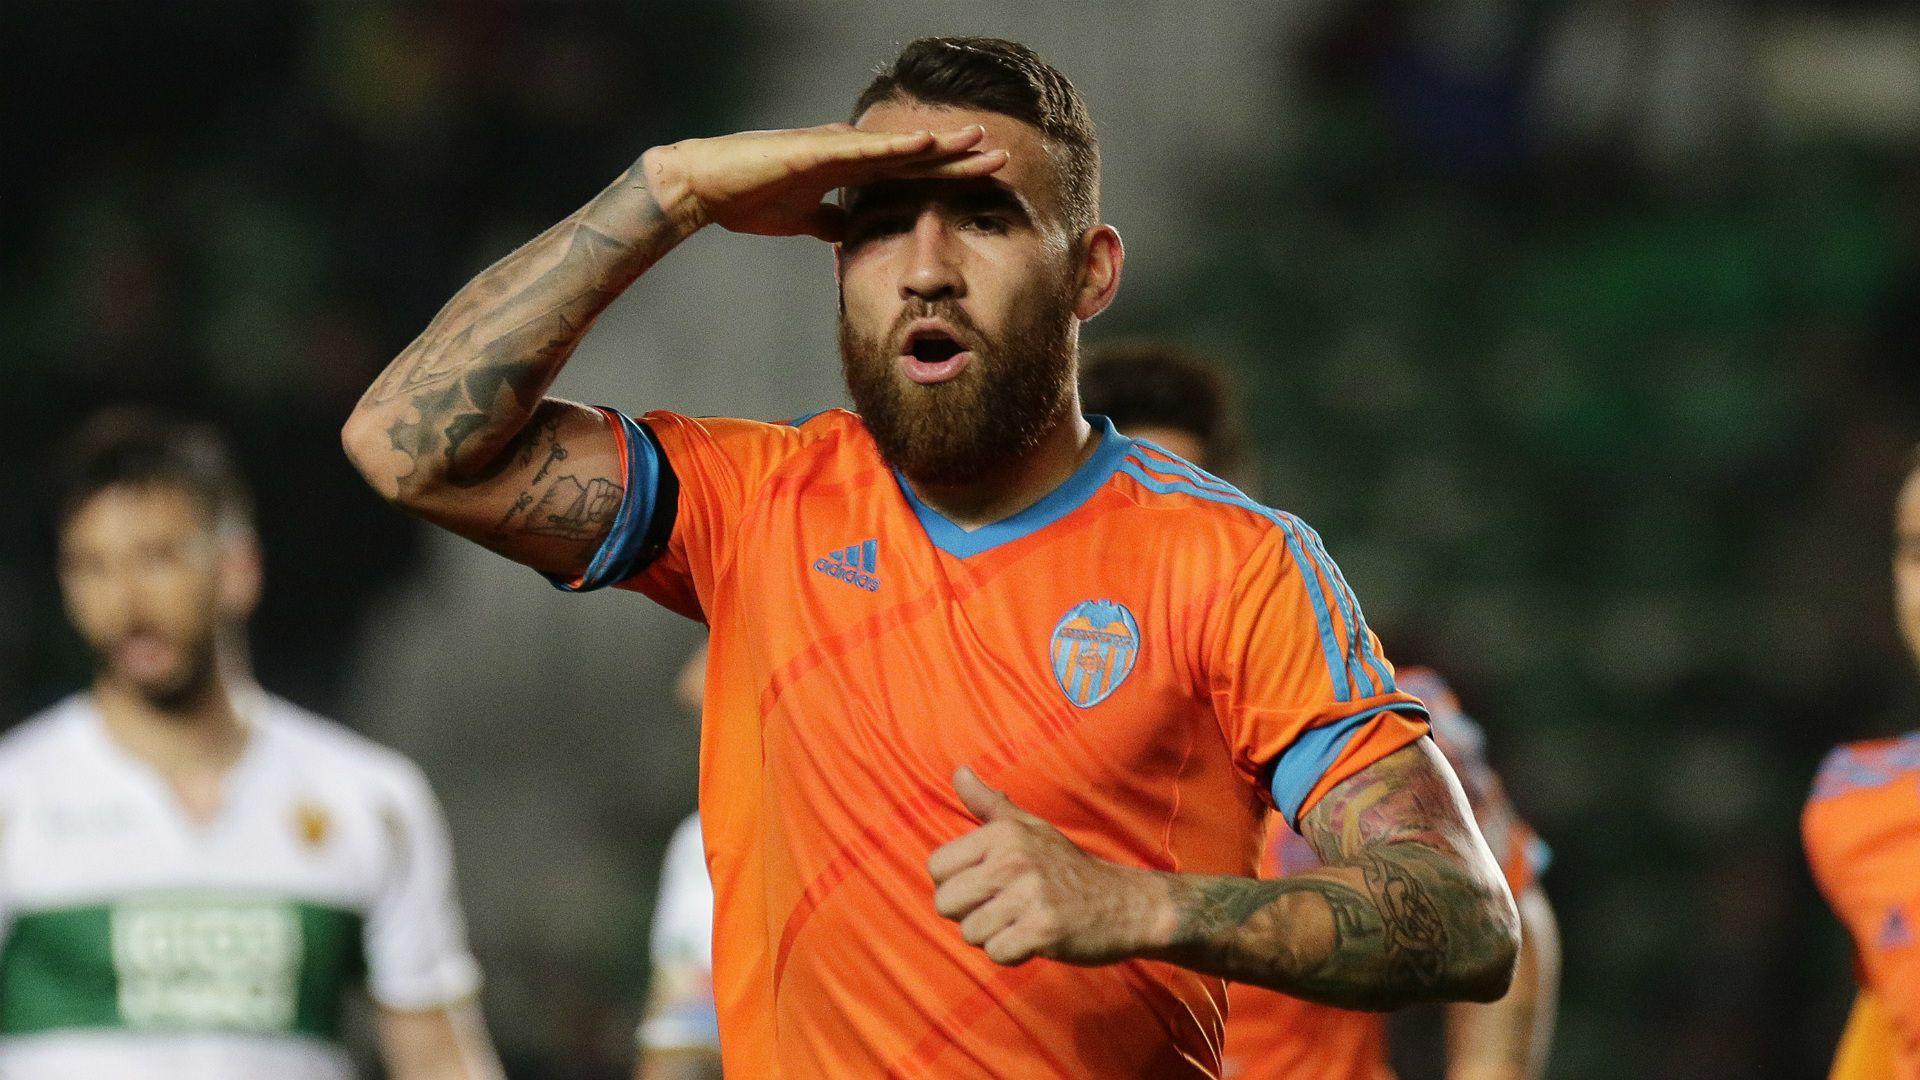 Otamendi Jets In As Manchester City Hopes To Complete Defender